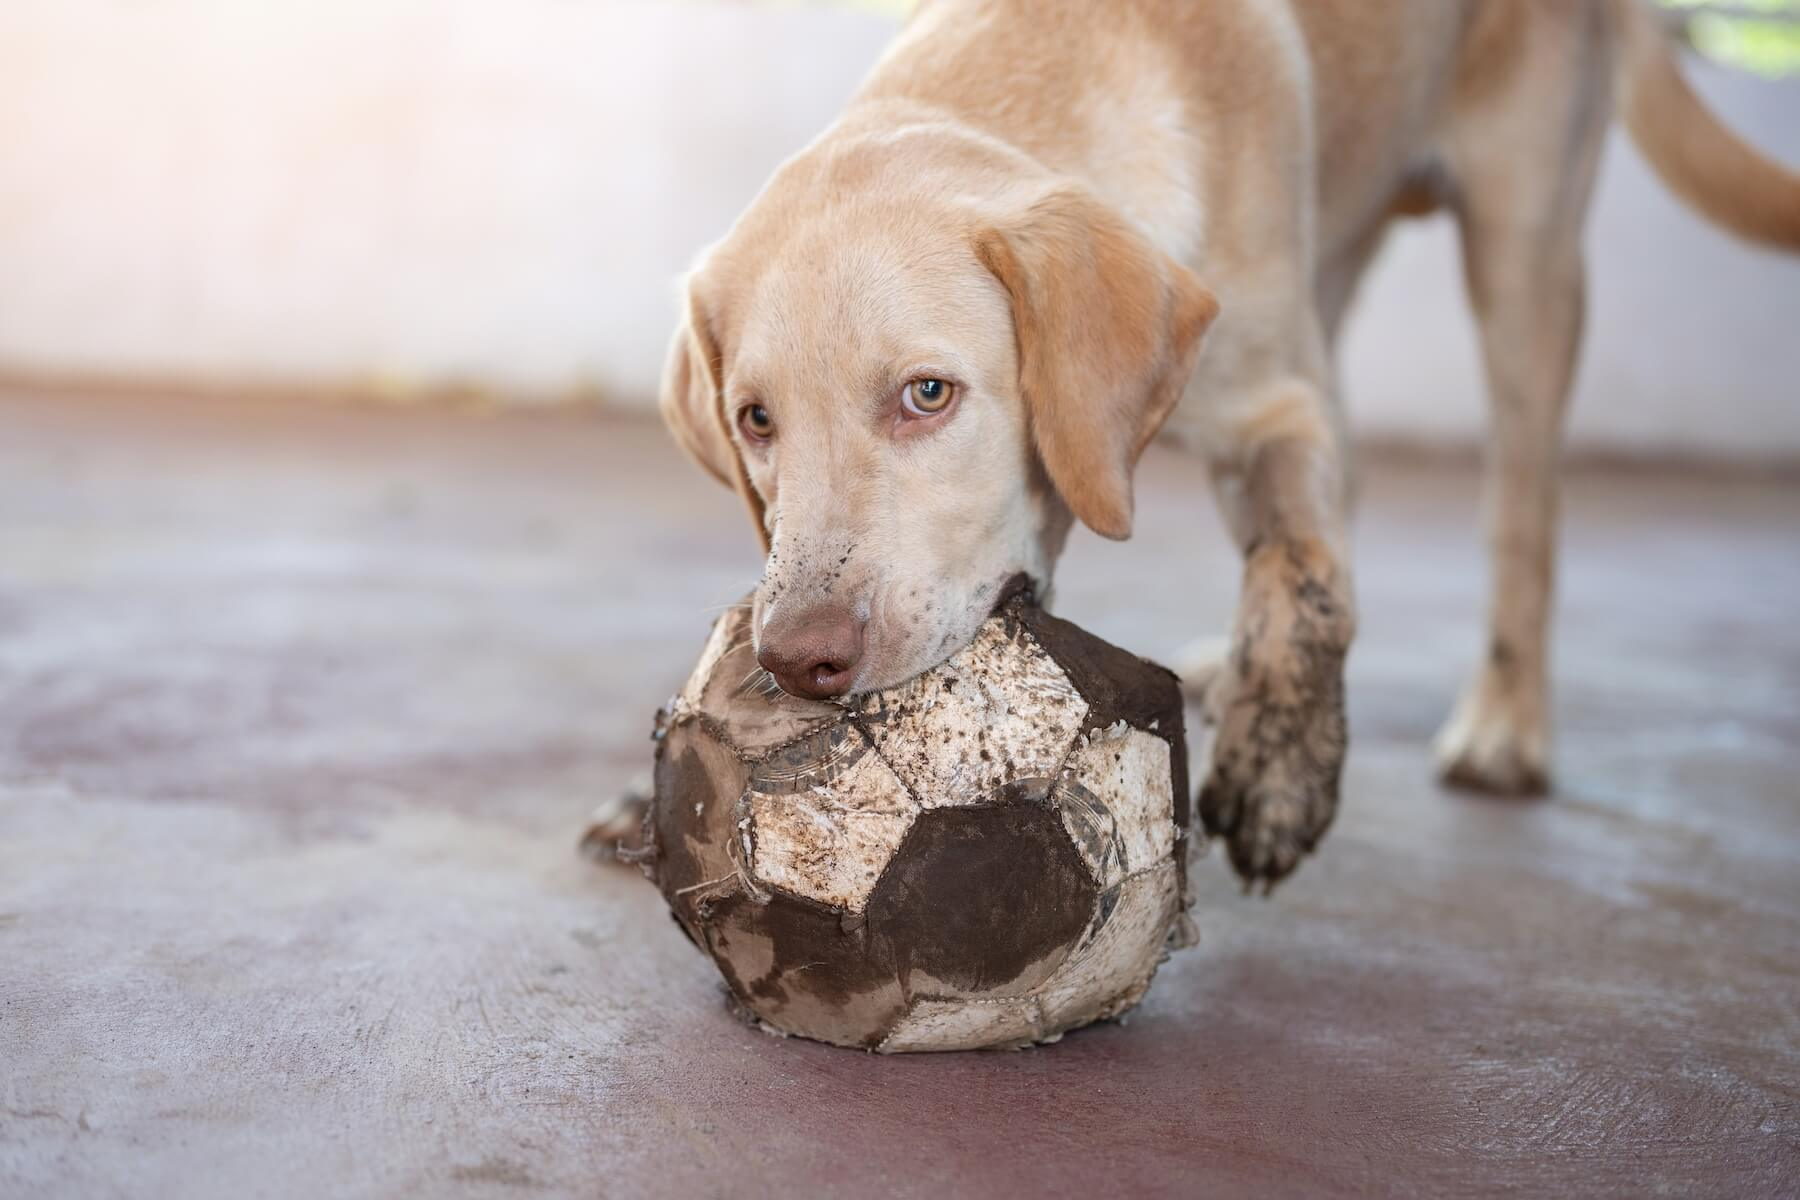 Dog with a dirty damaged ball that needs to be replaced.